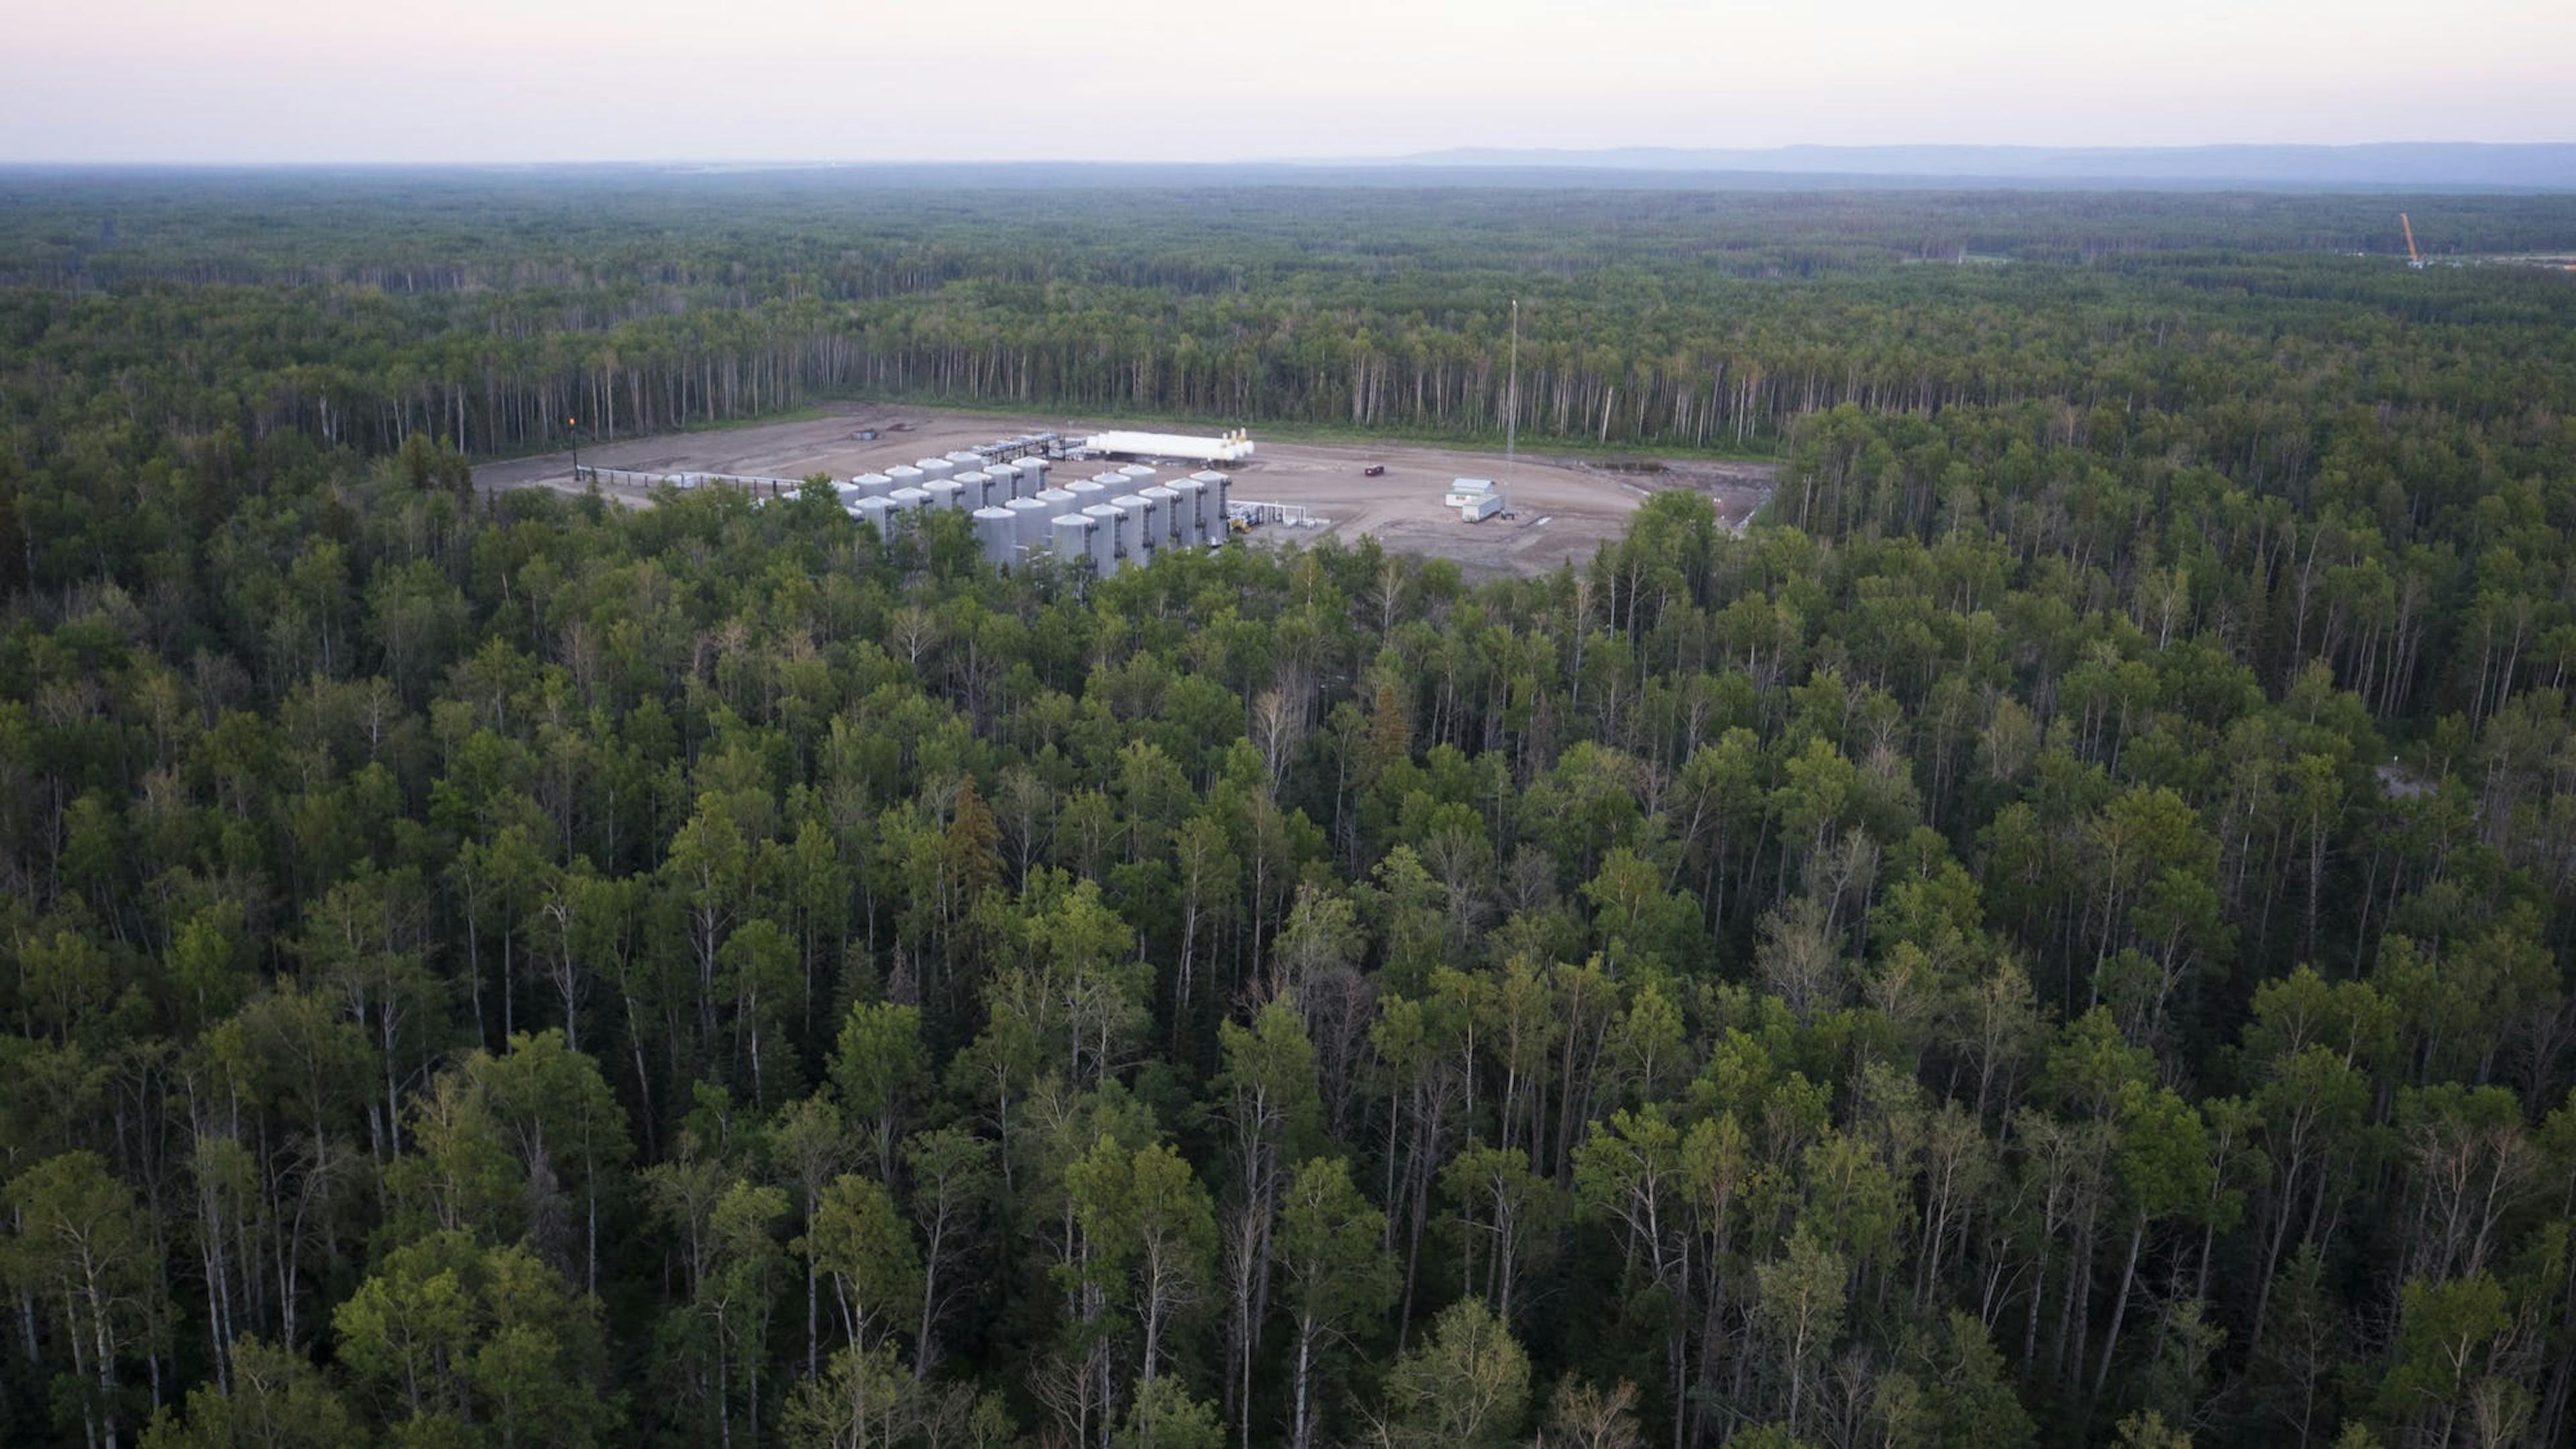 An aerial view of a gas plant in a dense forest.